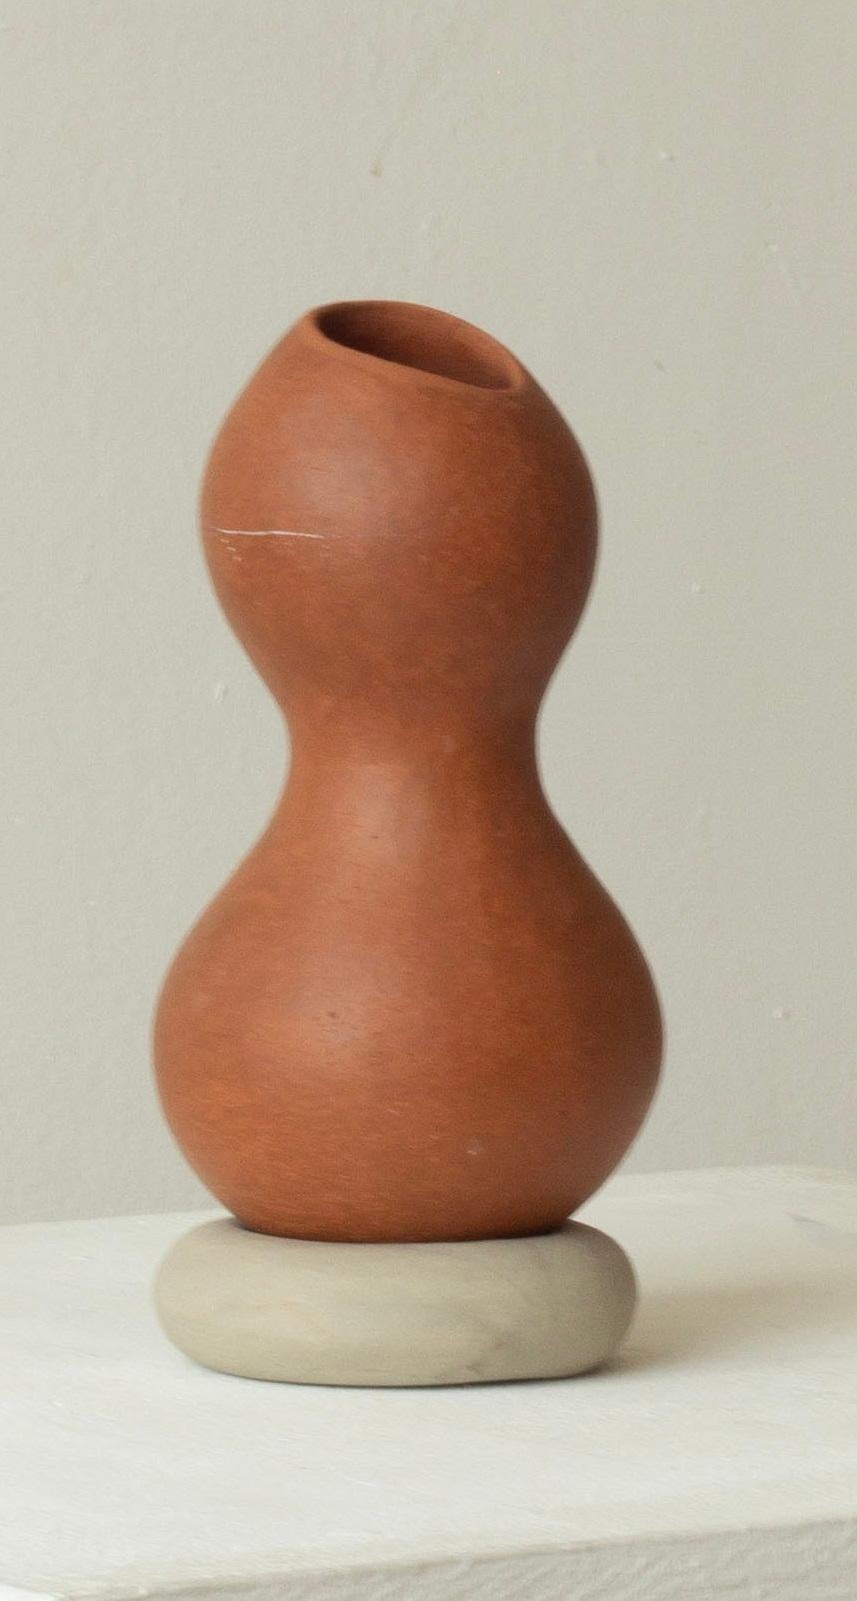 Woman Cracked But Healed 225 Vase by Karina Smagulova
One of a Kind.
Dimensions: Ø 9 x H 18 cm.
Materials: Terracotta, grey stoneware and epoxy.
​
With an Armenian and Kazakhstan heritage, Karina Smagulova was born in Greece in 1995 and graduated